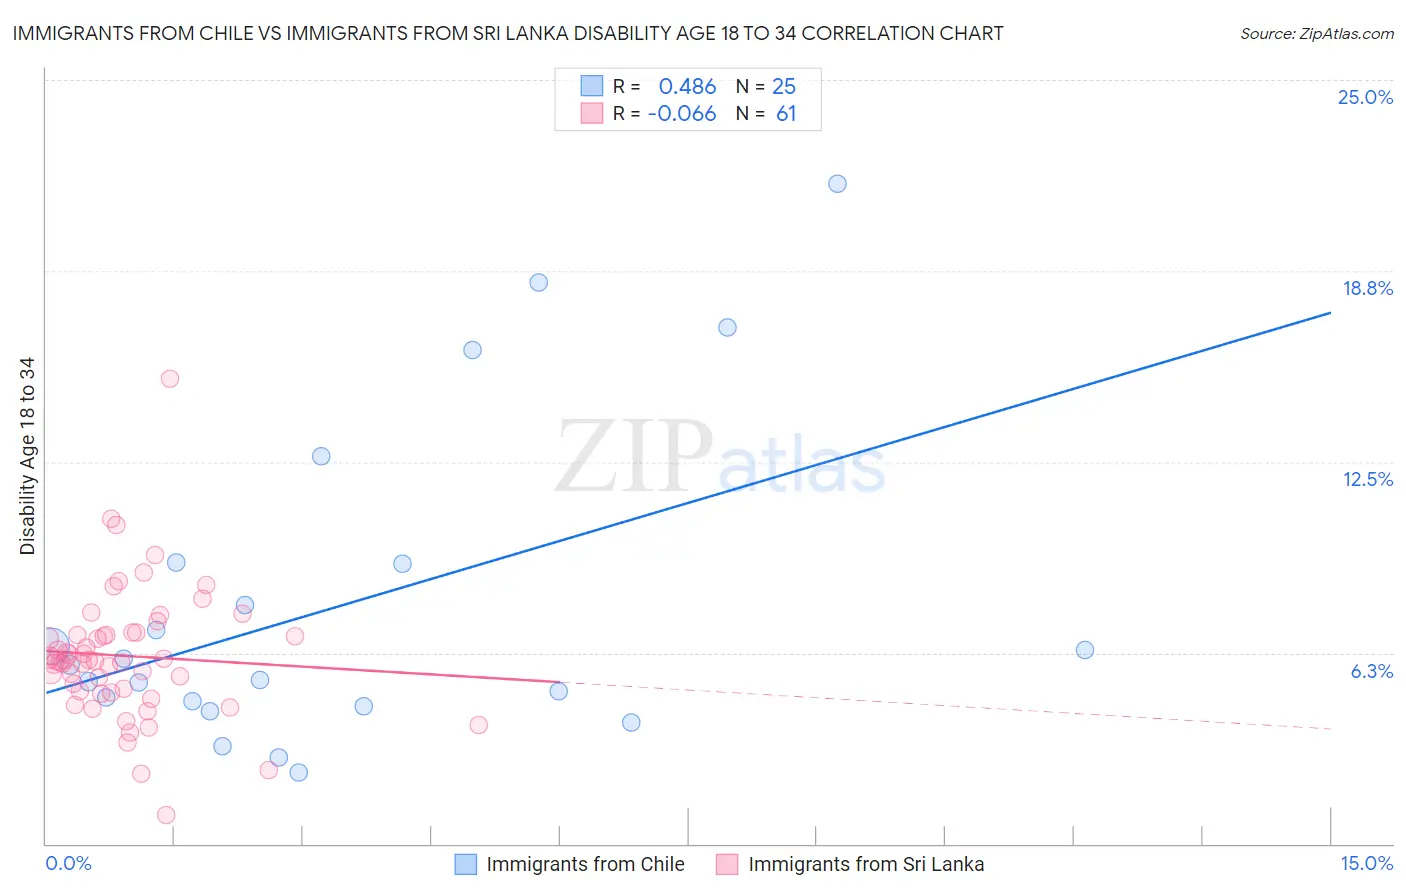 Immigrants from Chile vs Immigrants from Sri Lanka Disability Age 18 to 34